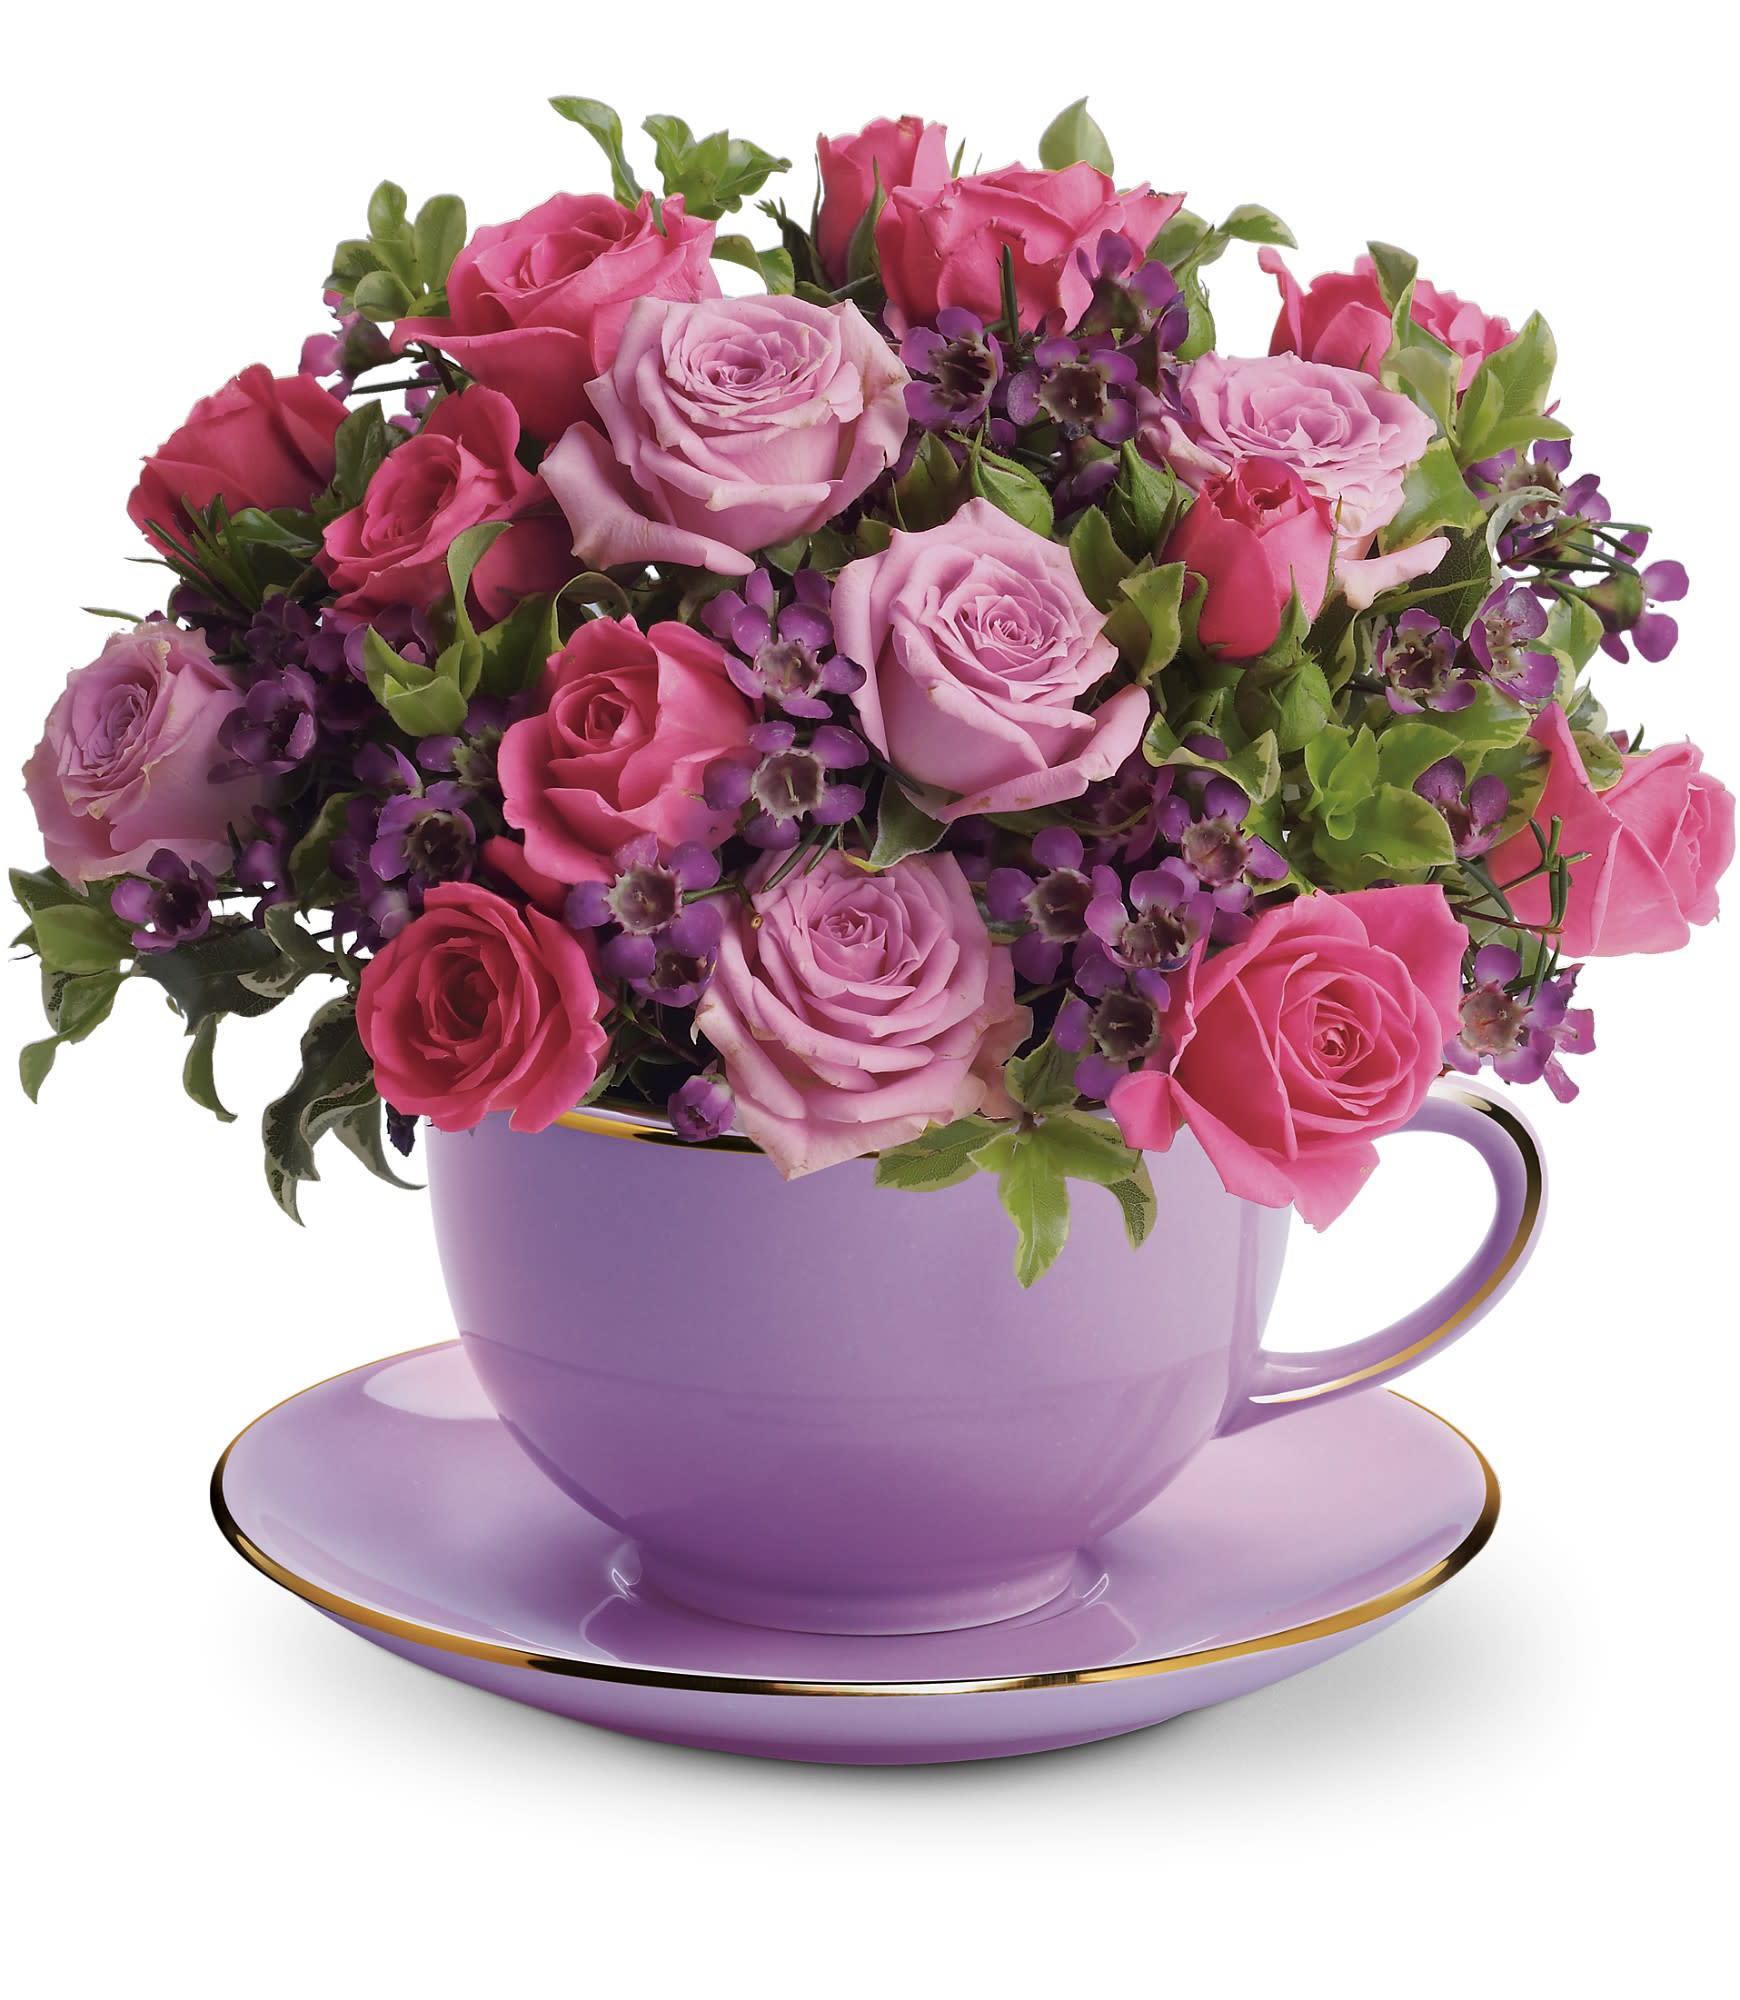 Teleflora's Cup of Roses Bouquet - The cool beauty of this distinctive gift will soothe a family member's soul. And the fact that you have chosen such a unique arrangement it will make this delivery even more special. Cup Colors may vary, but they all have an instinctive beauty. 